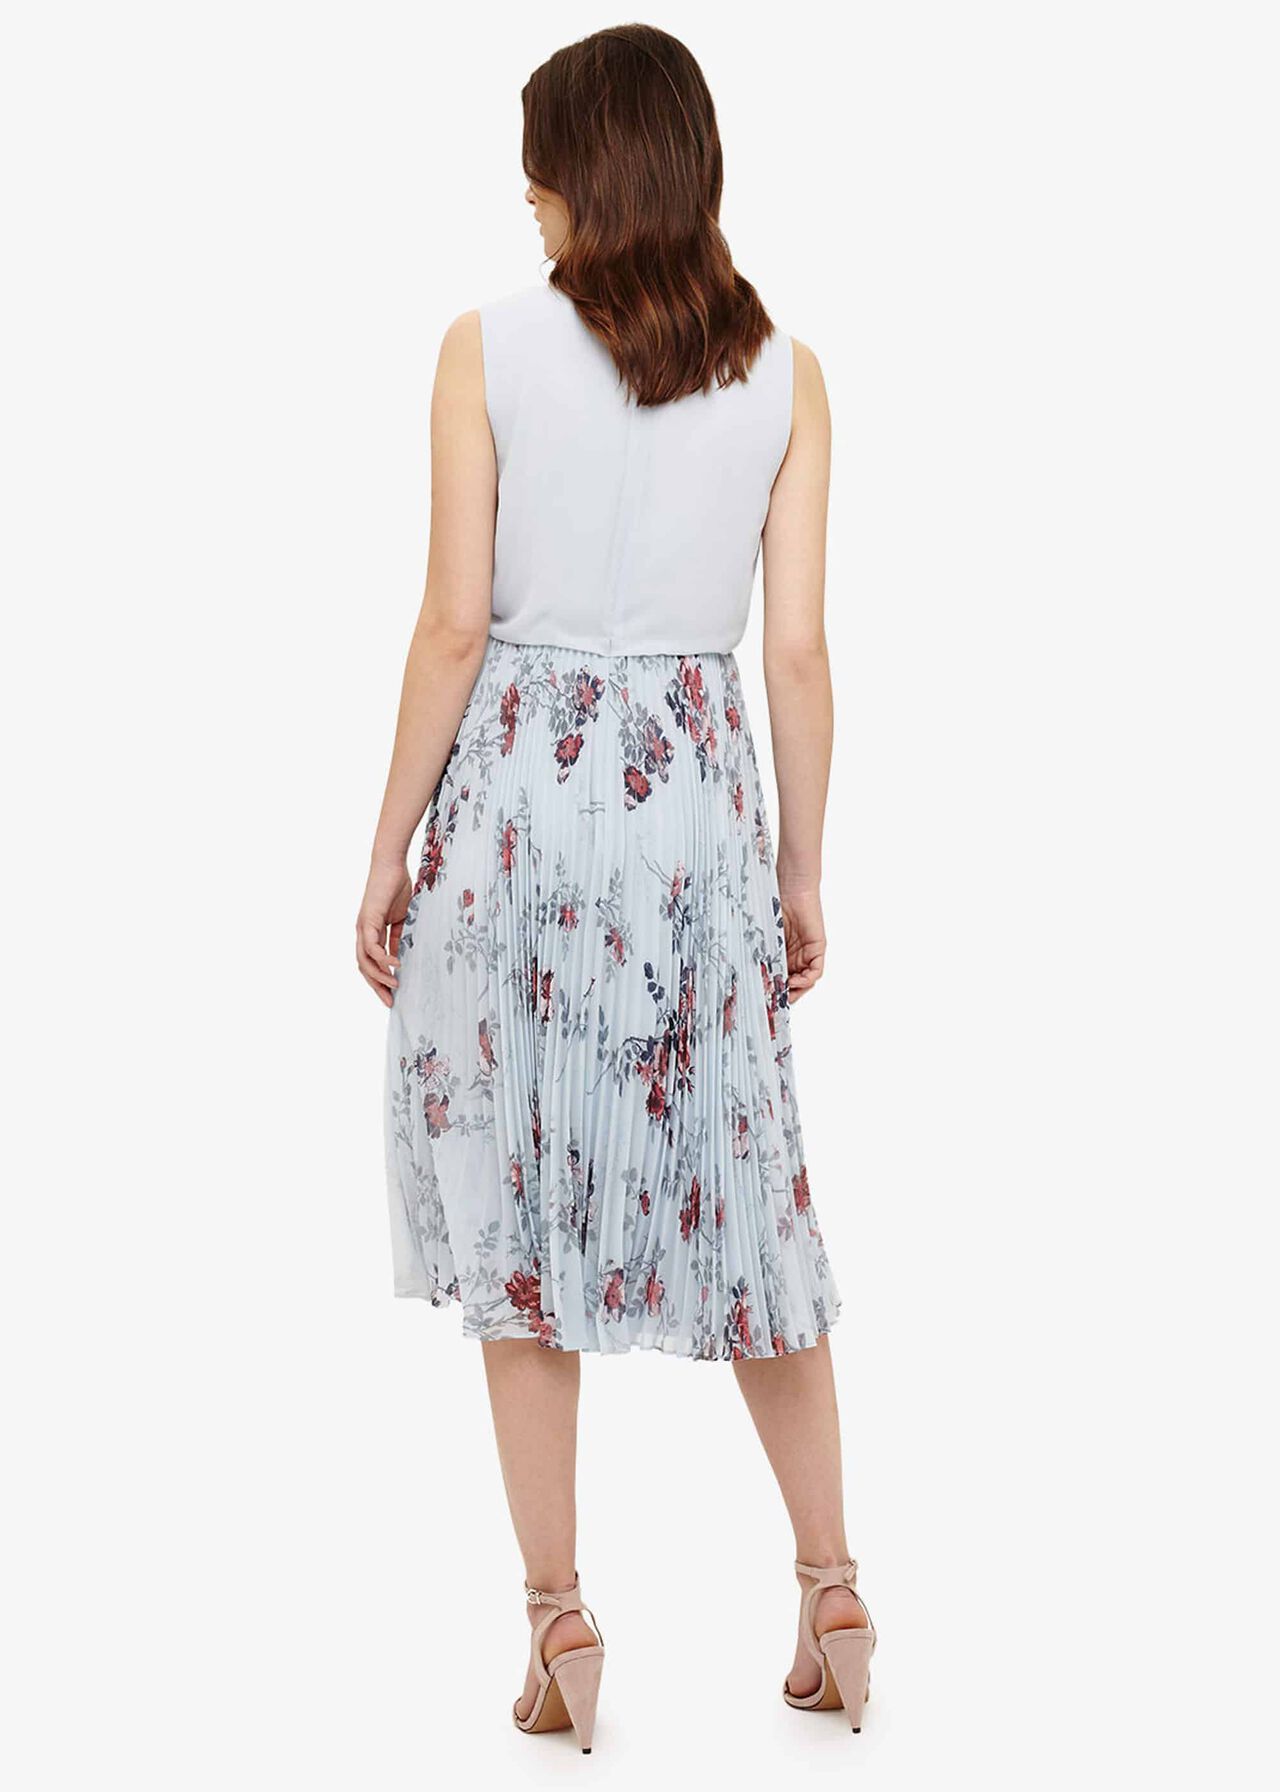 Patricia Pleated Floral Dress